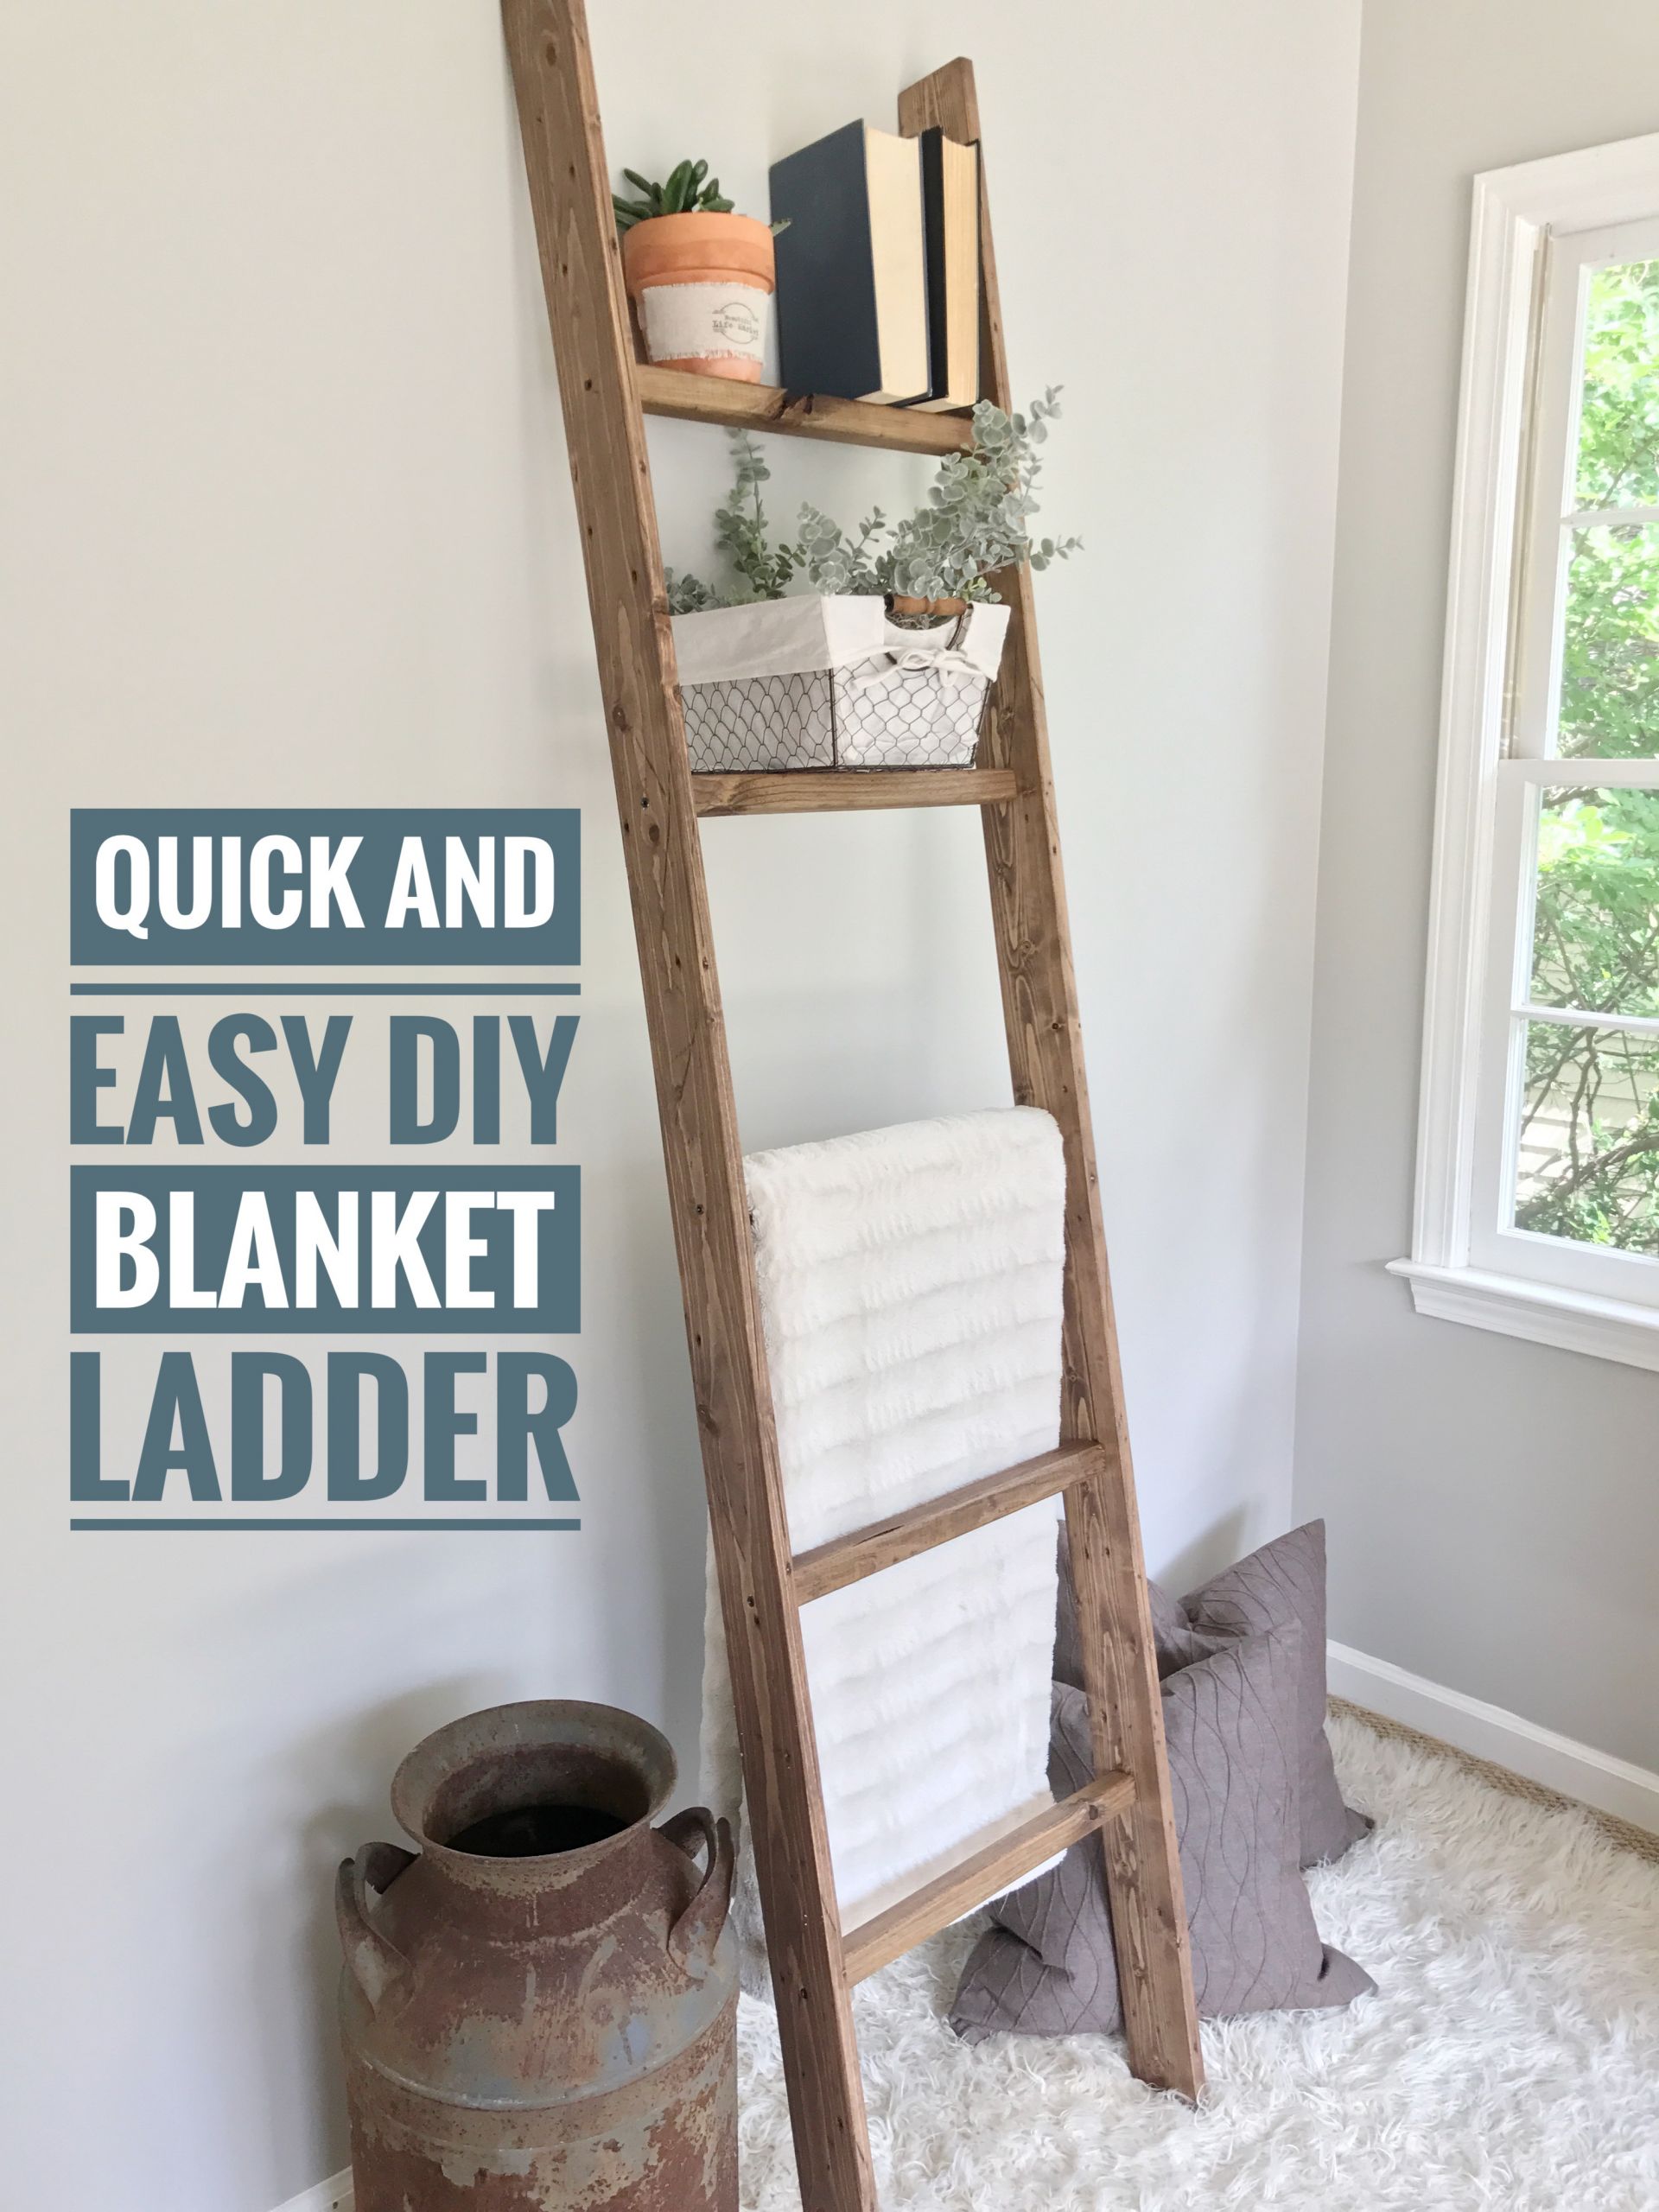 DIY Decorative Ladder
 Ugly Home fice Makeover Part 8 a The Simple DIY